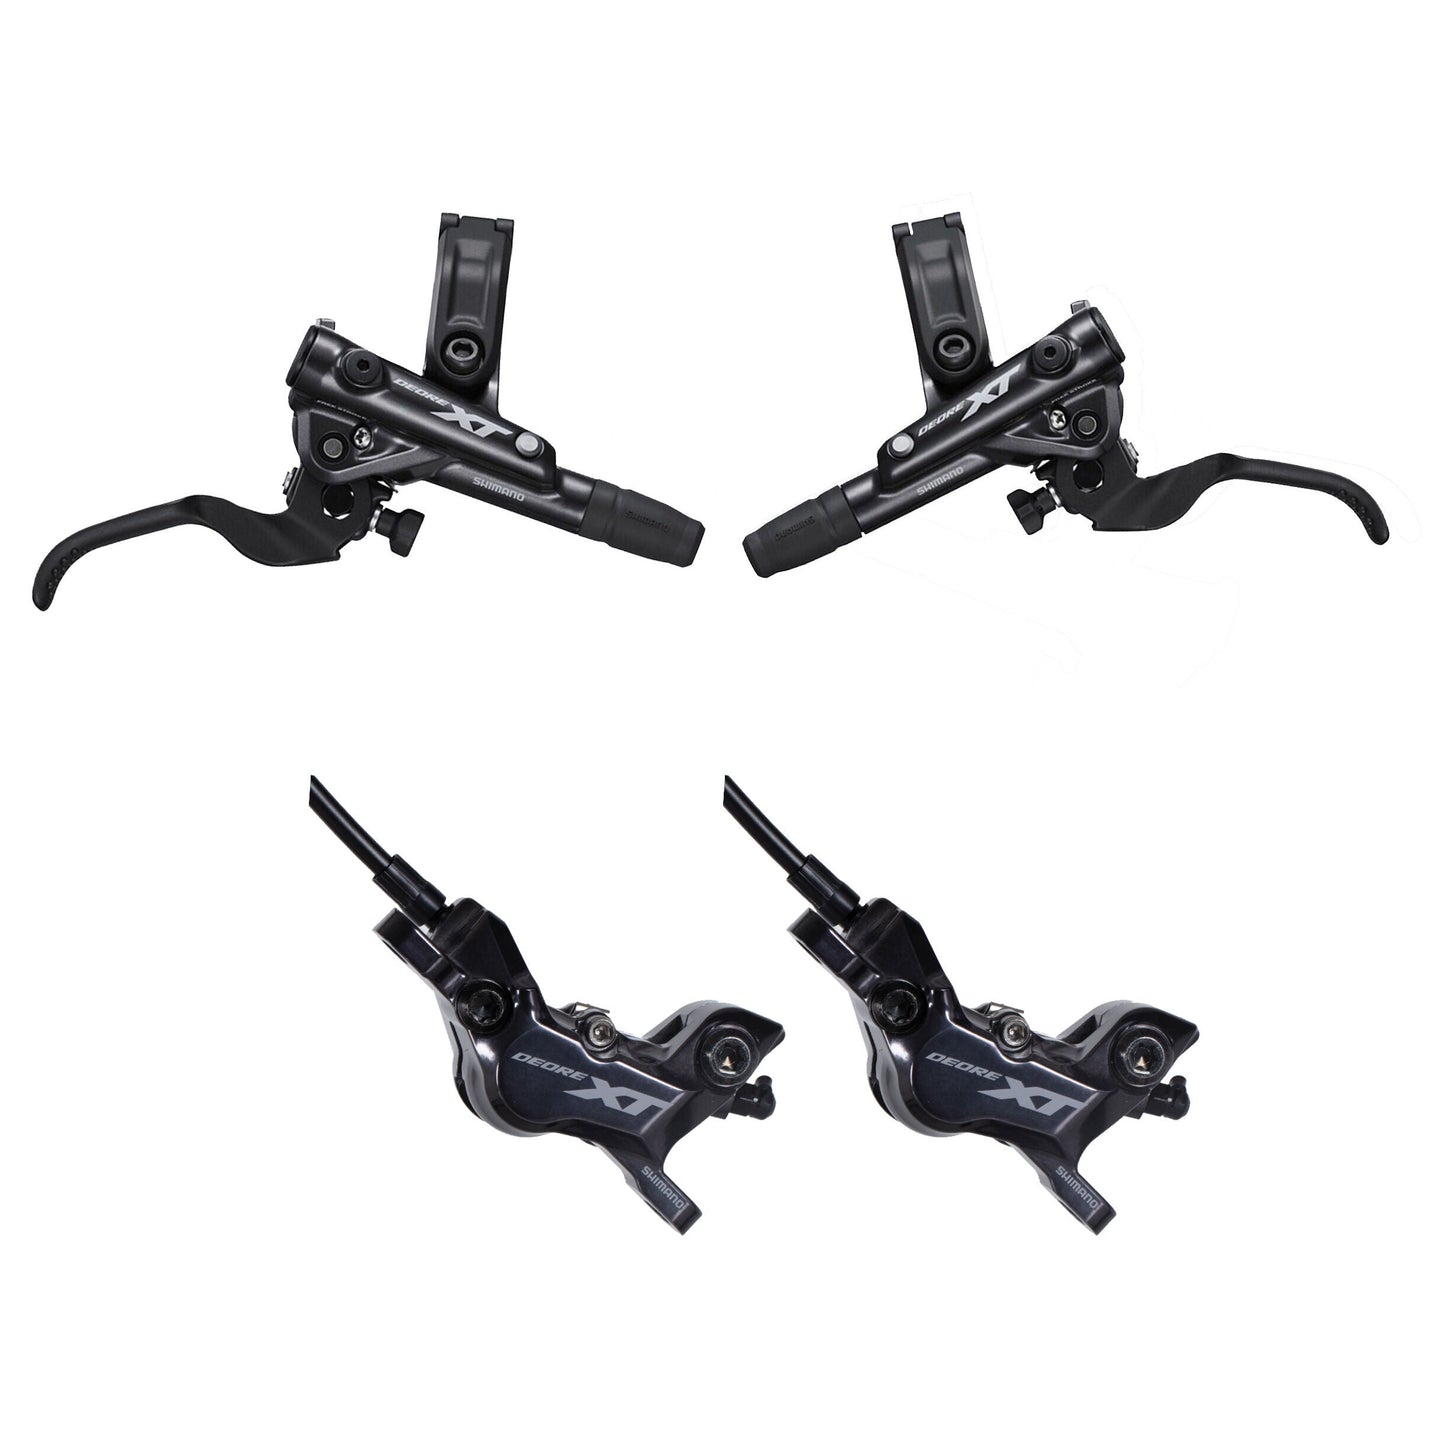 Pair of Shimano Deore XT BL-M8100 + BR-M8120 disc brakes 